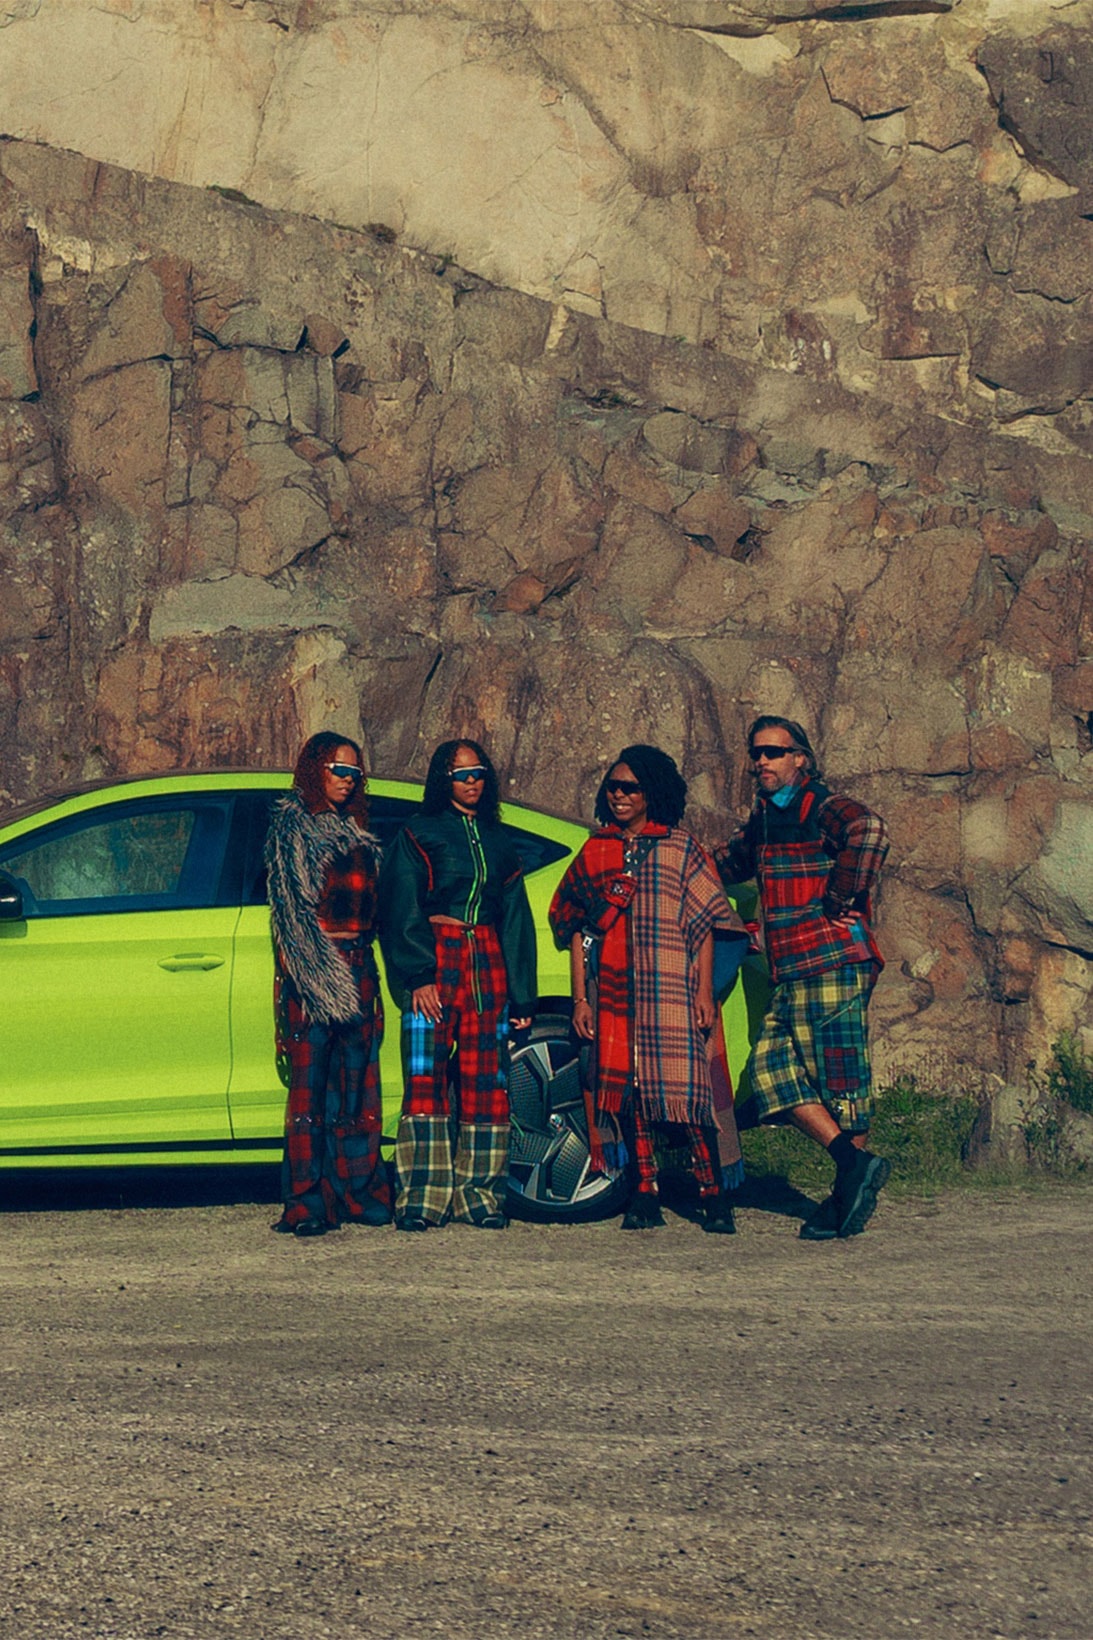 Rave Review Skoda Swedish Brand Upcycled Apparel Made of Scrapped Car Parts RElease Info